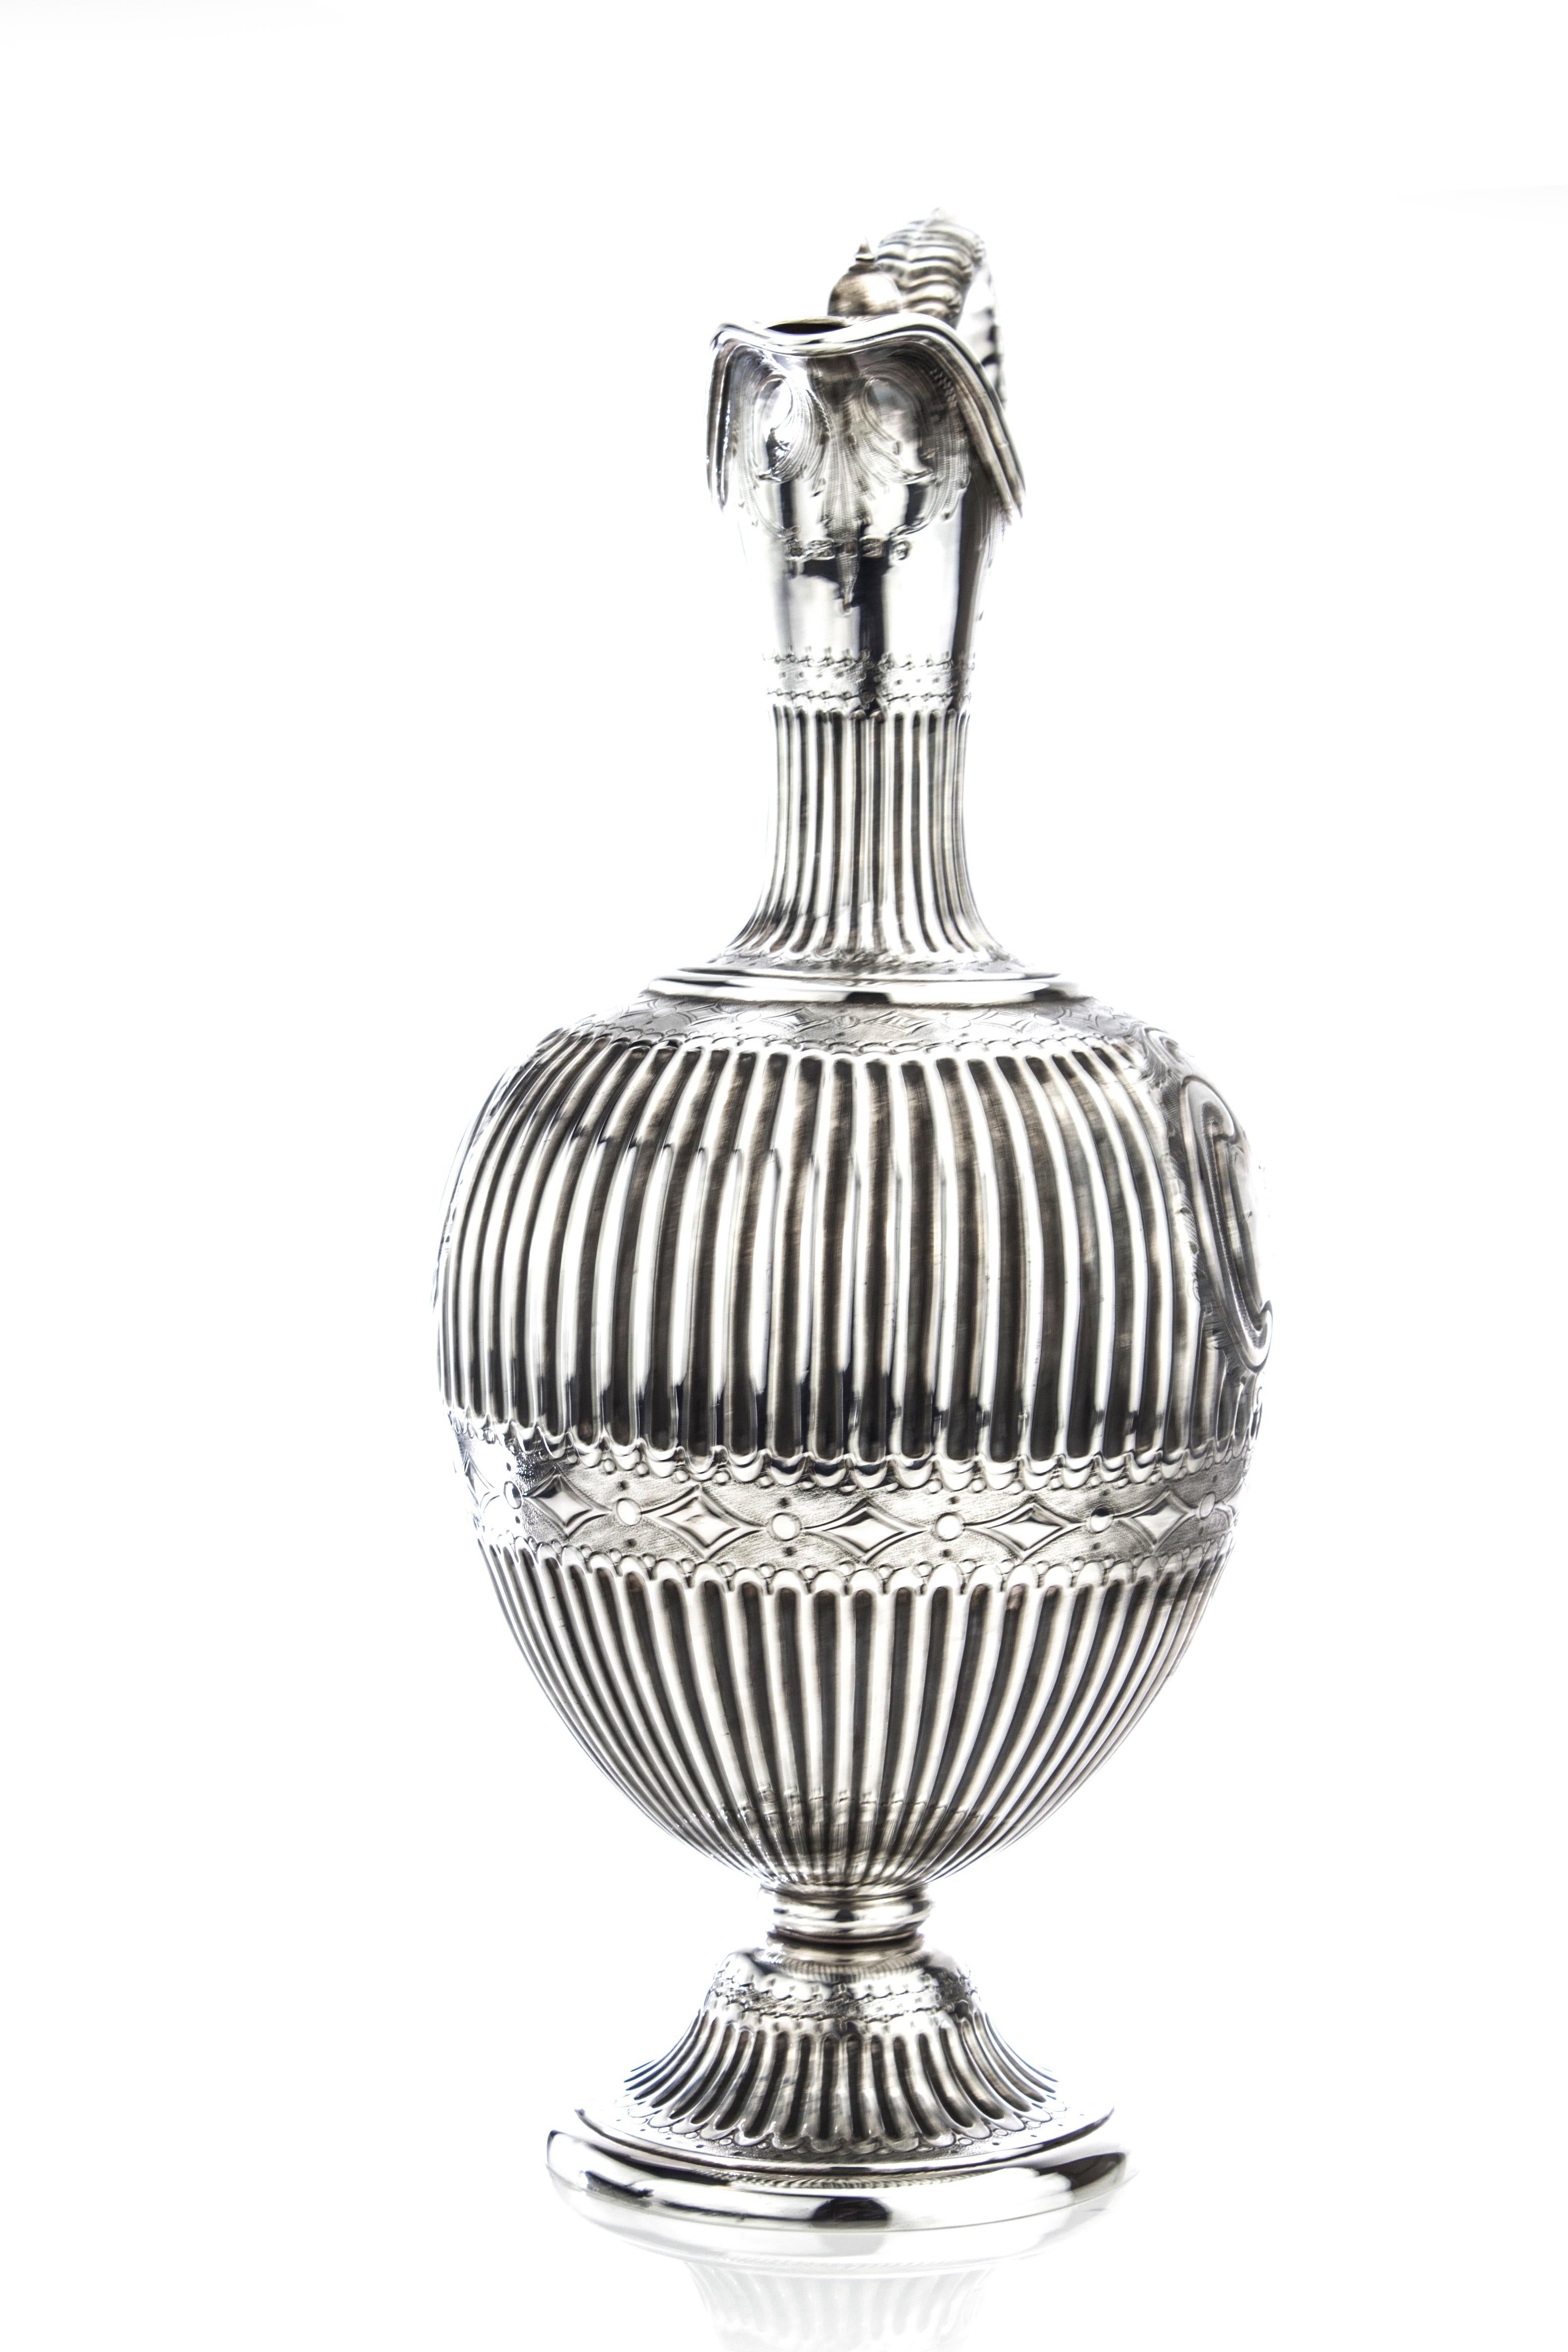 Antique Victorian Sterling silver claret jug/ water pitcher
Made in England, London, 1861
Maker: Martin, Hall & Co (Richard Martin & Ebenezer Hall)
Fully hallmarked.

Dimensions:
Height 31.5 cm, width 16 cm, diameter 13 cm
Approximate weight